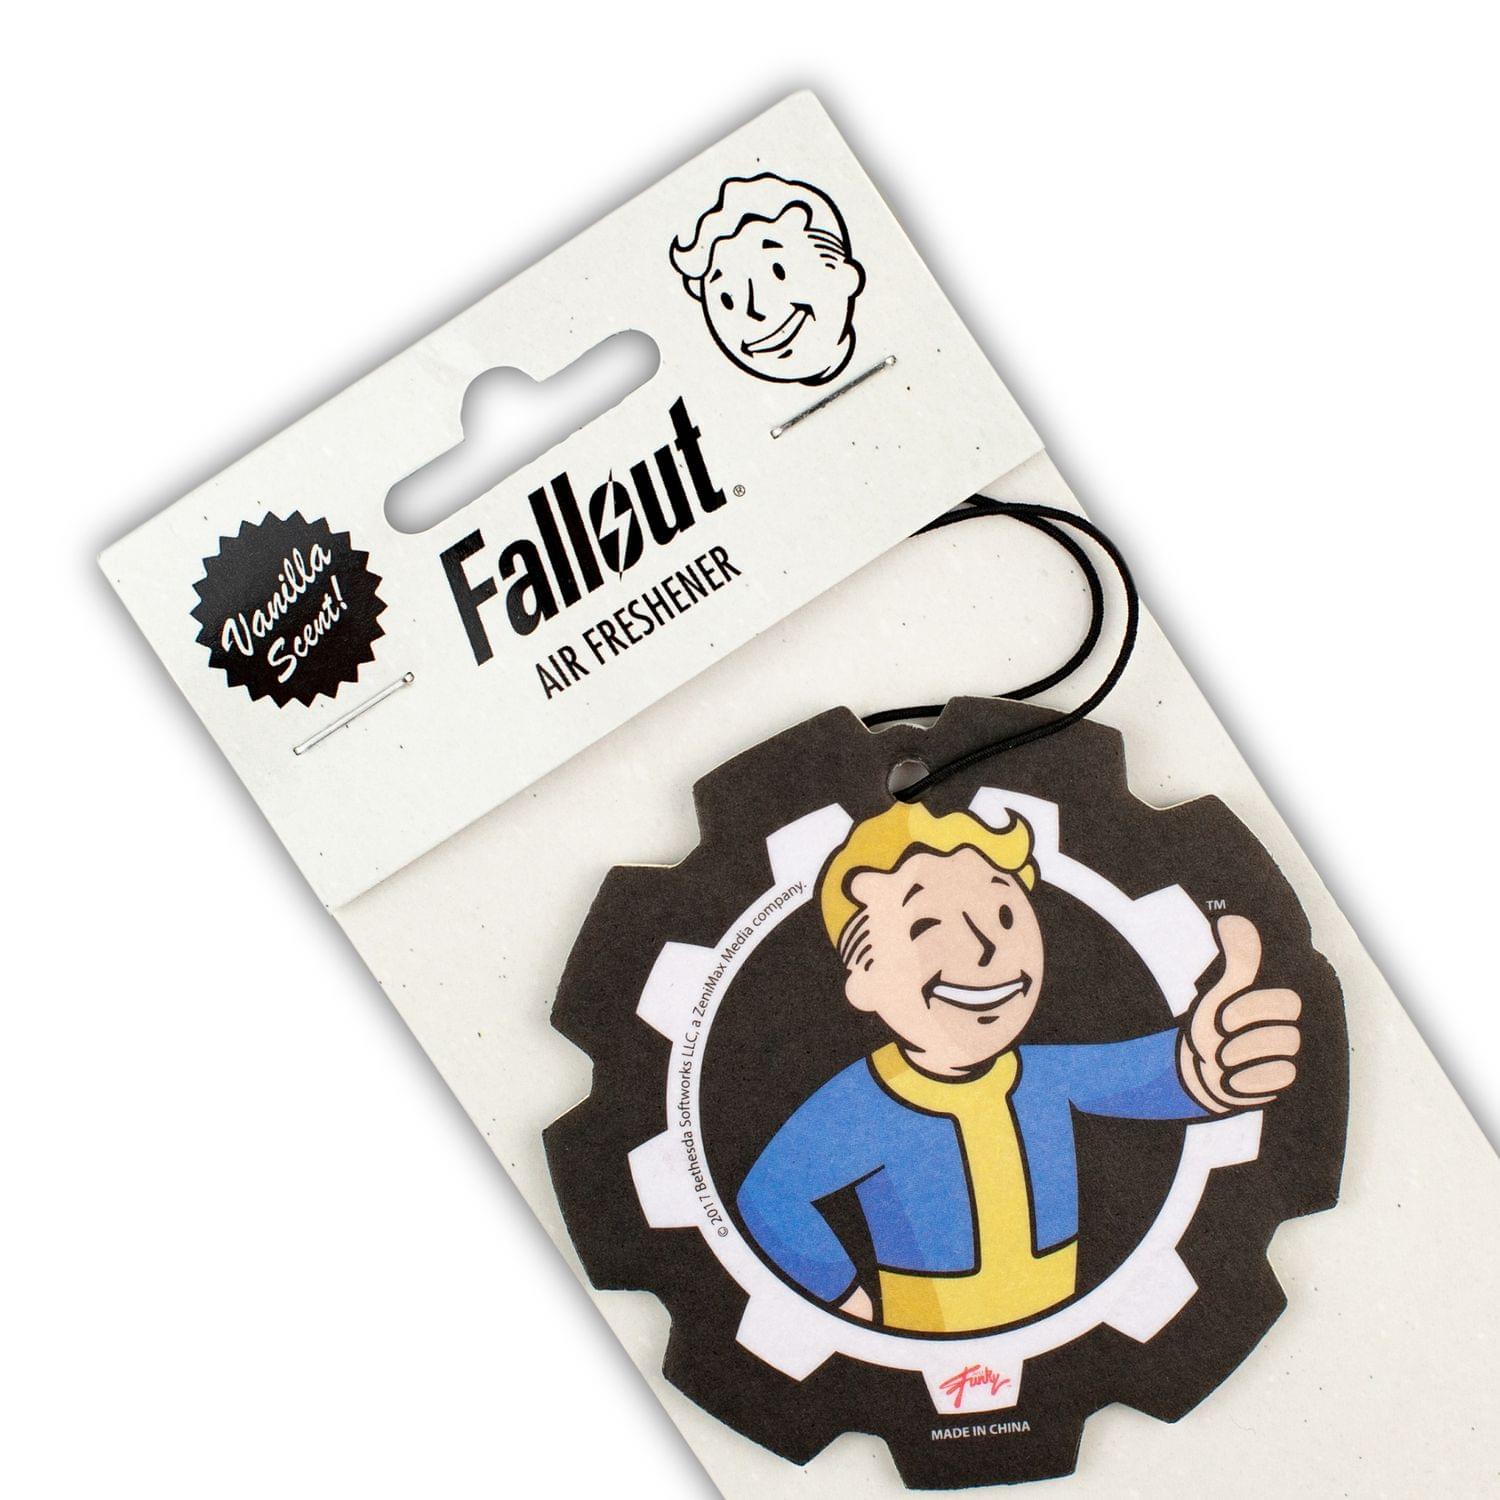 Fallout 4 Vault Boy Hanging Air Freshener for Cars and Closets | Vanilla Scent